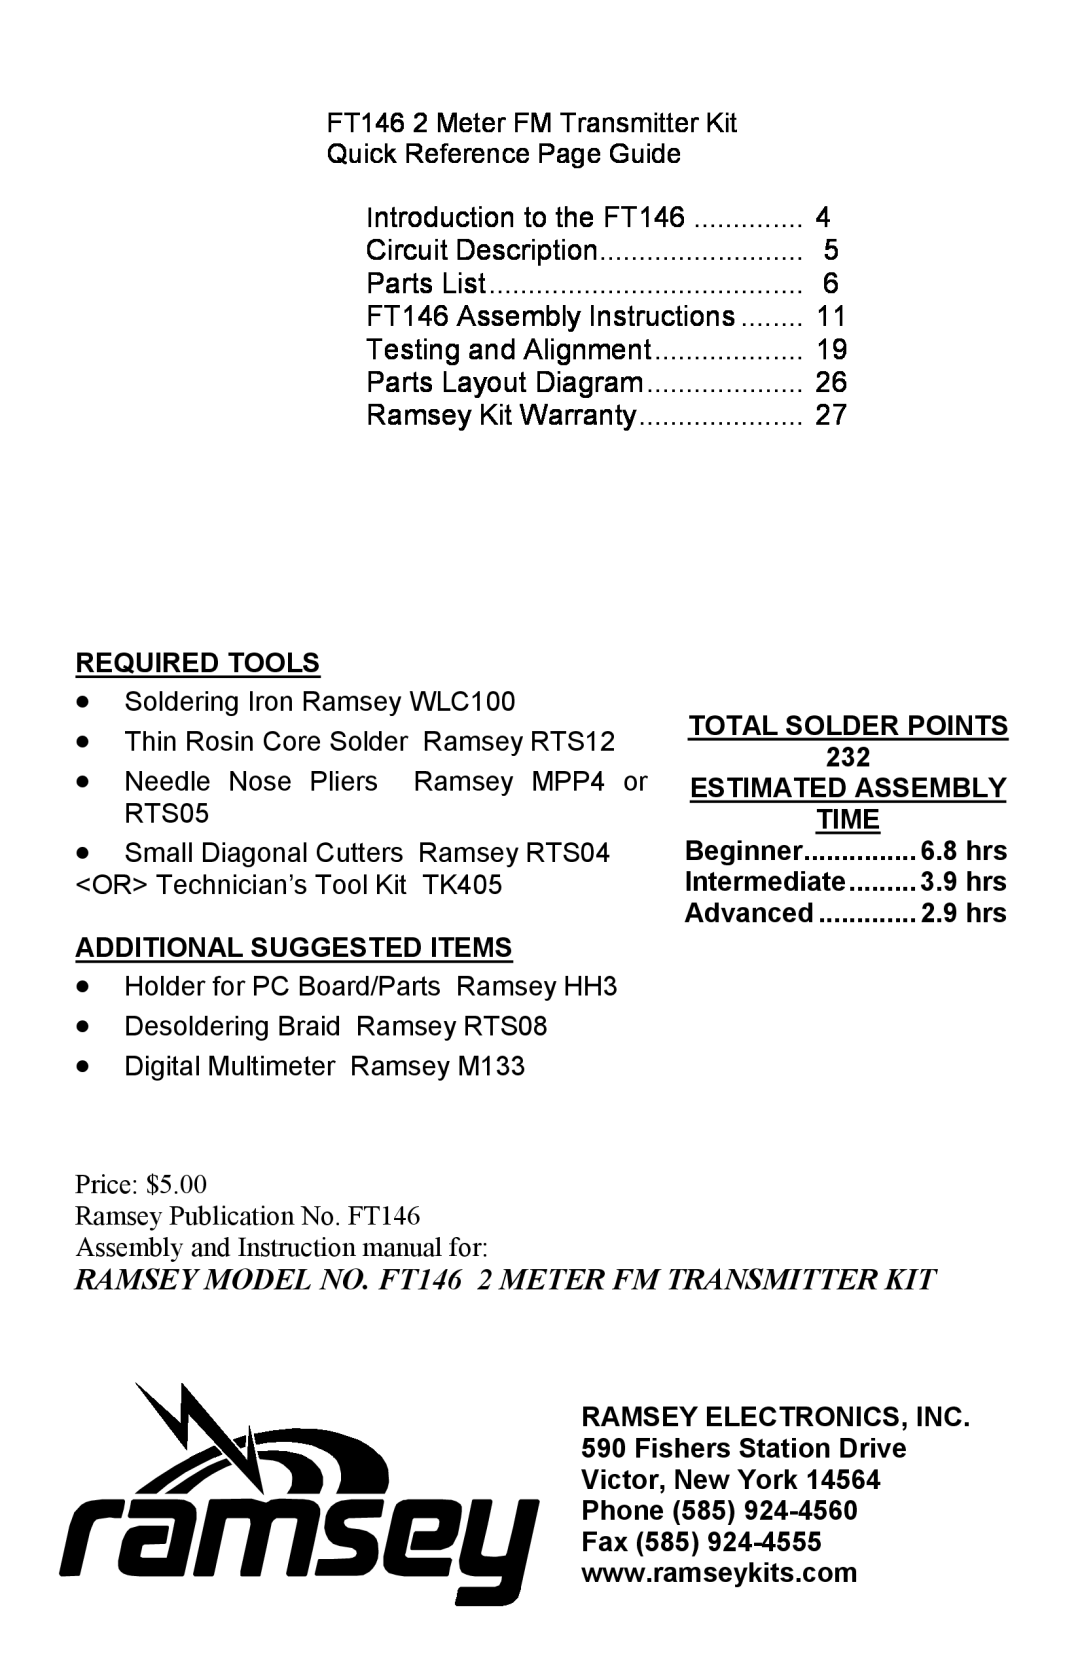 Ramsey Electronics manual RAMSEY MODEL NO. FT146 2 METER FM TRANSMITTER KIT, Required Tools, Total Solder Points, Time 